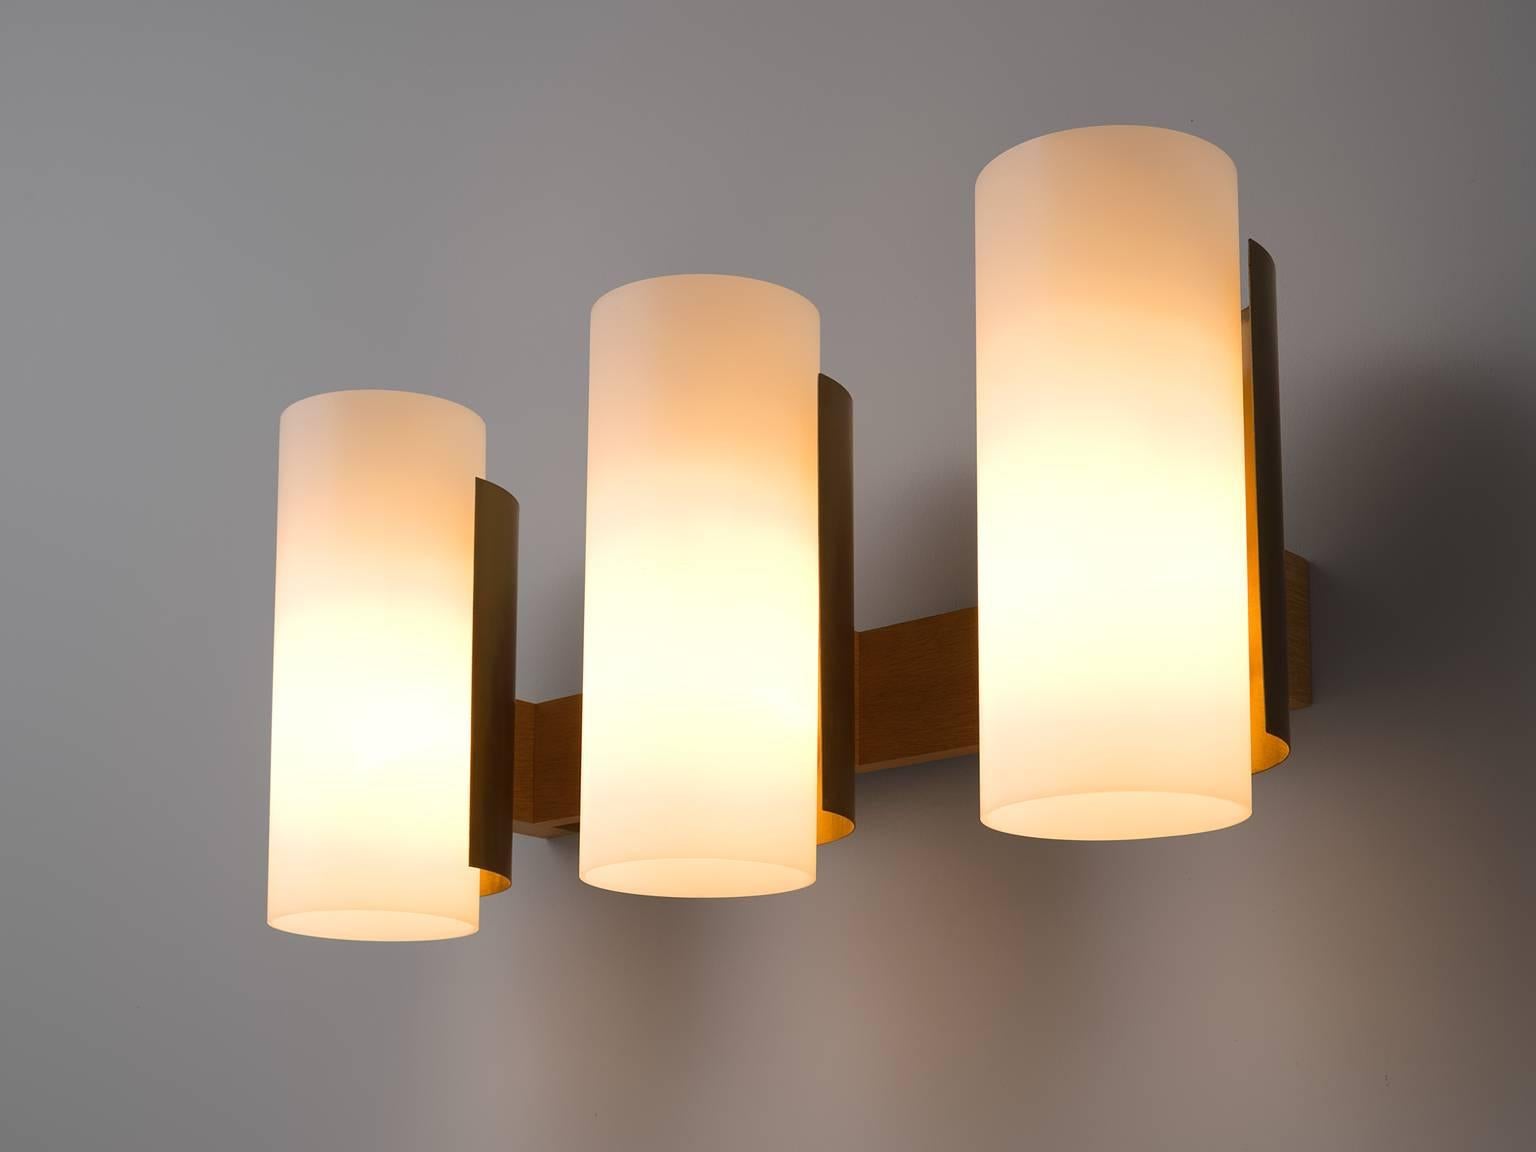 Sten Carlquis, set of three wall lights, in brass wood and polyester, Sweden, 1960s. 

Set of three large wall lights. Each light consist three cylindrical white shades, which are held by a brass frame. The wall fixture is made out of wood. The